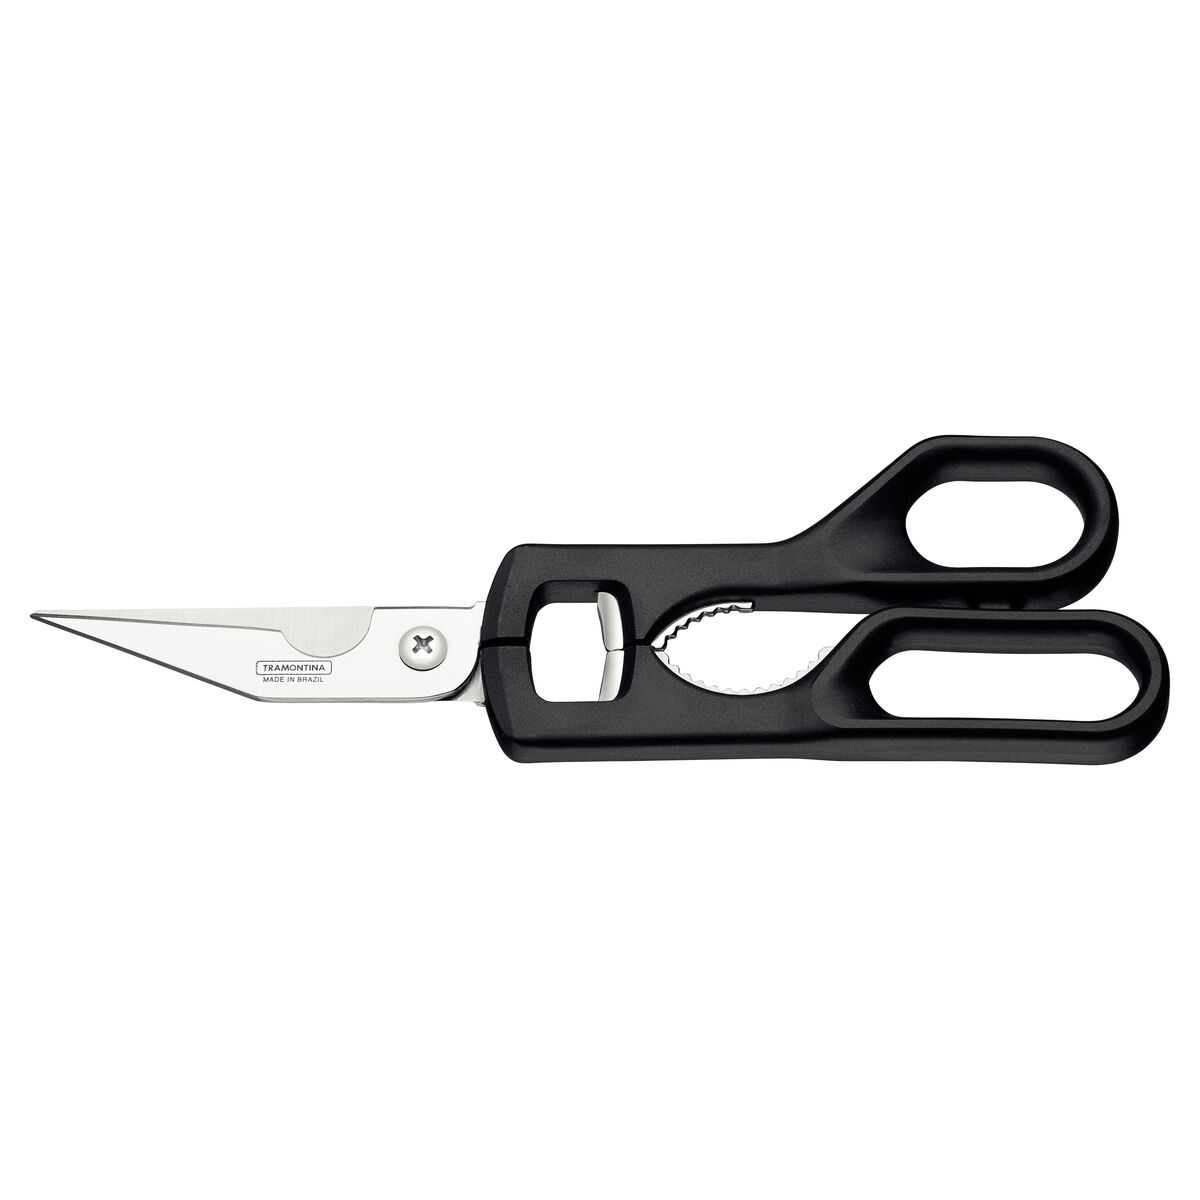 Tramontina Supercort Carving Scissors with Stainless-Steel Blades and Onyx Polypropylene Handle, 9"